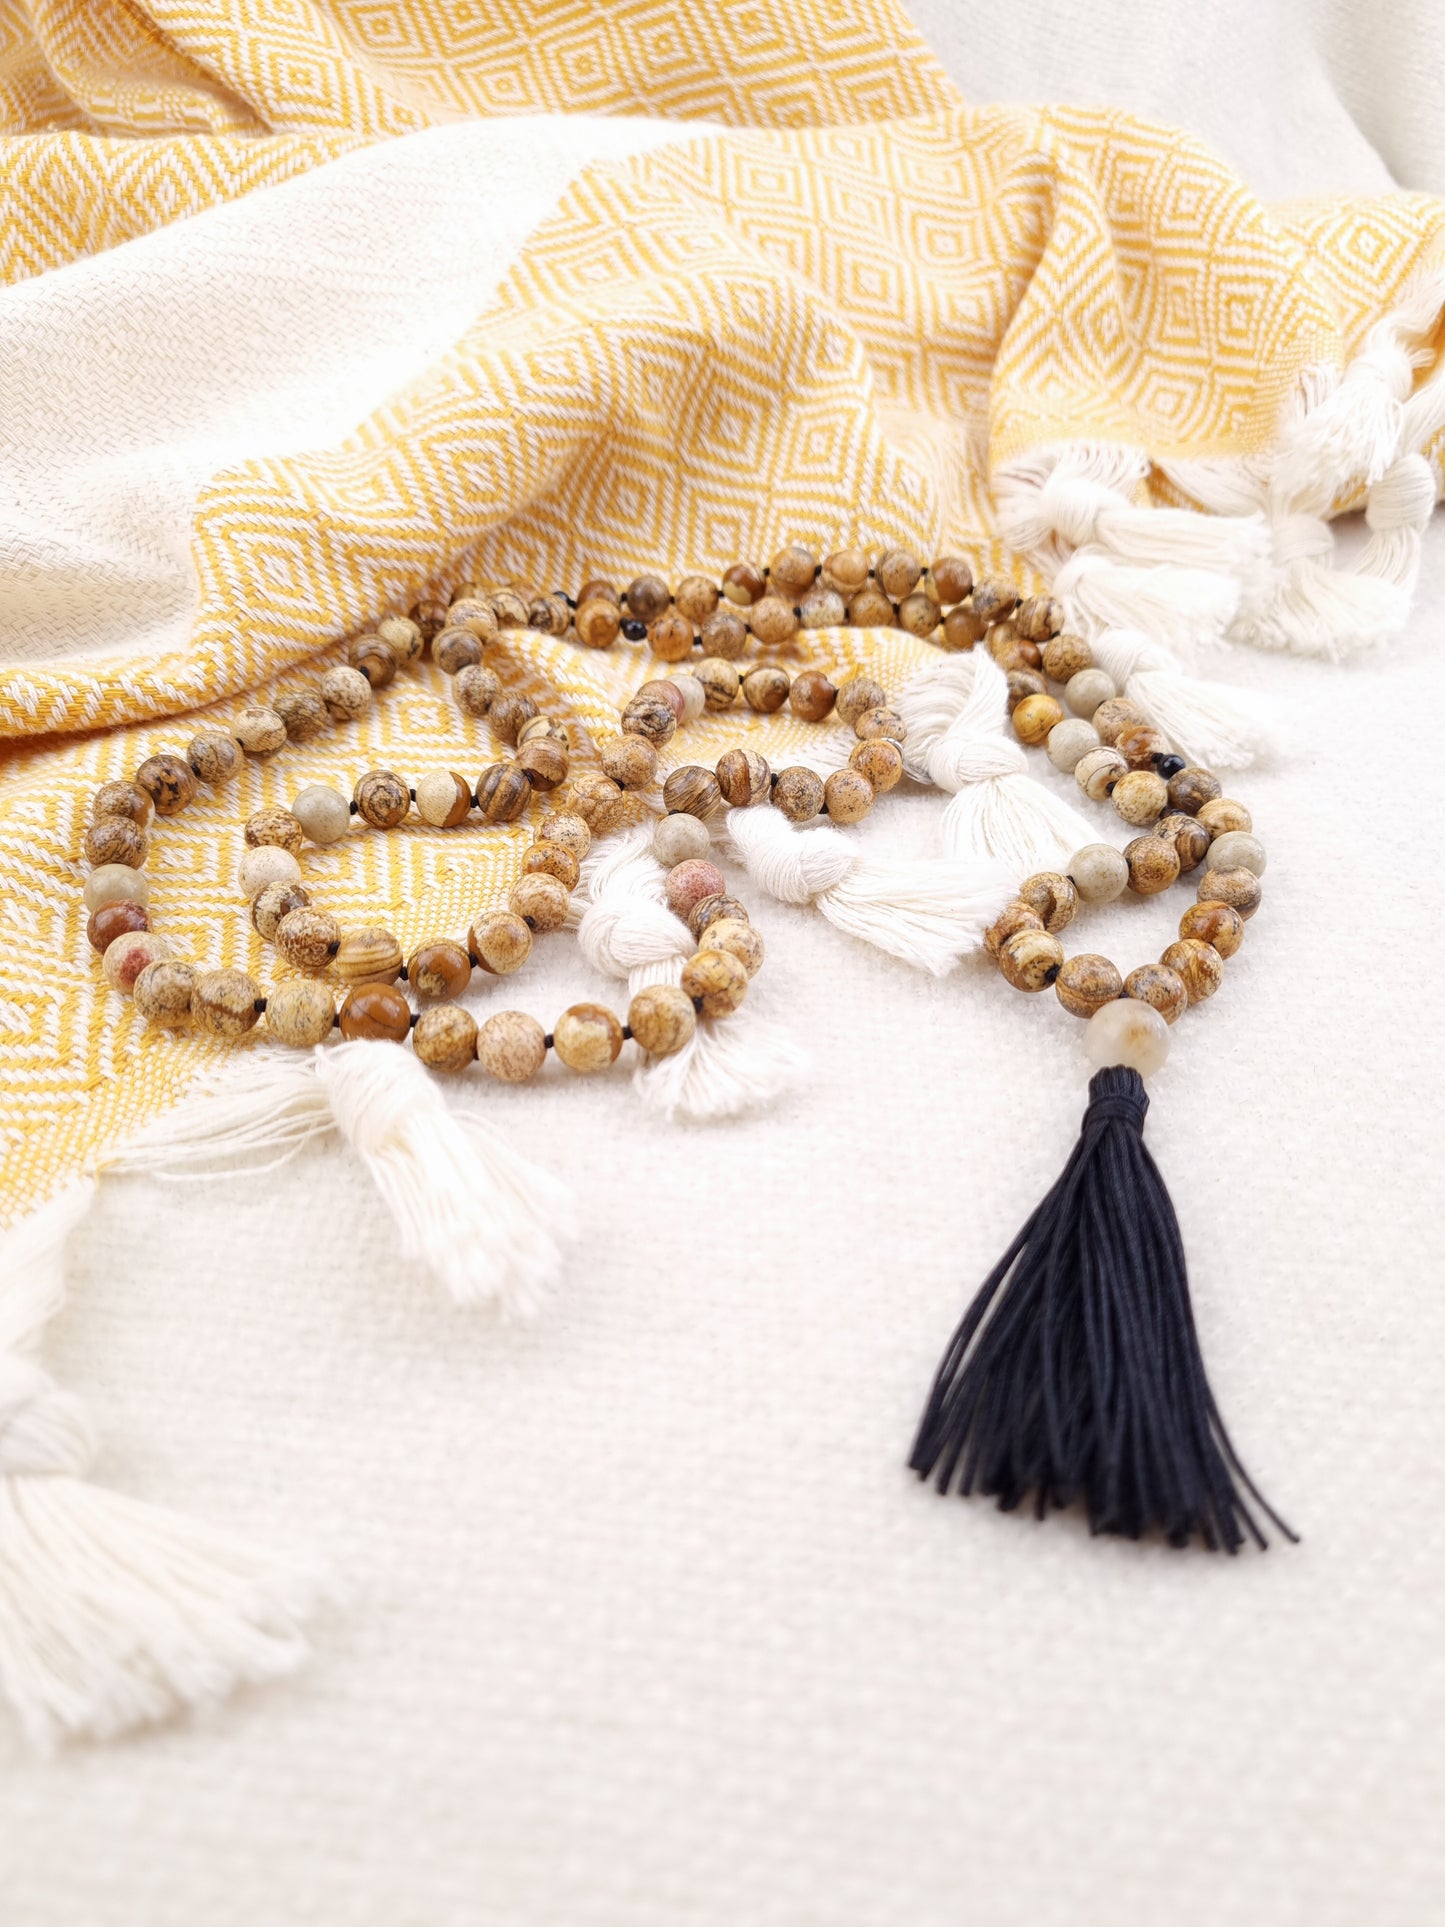 Mantra Mala - 'I have found my place'